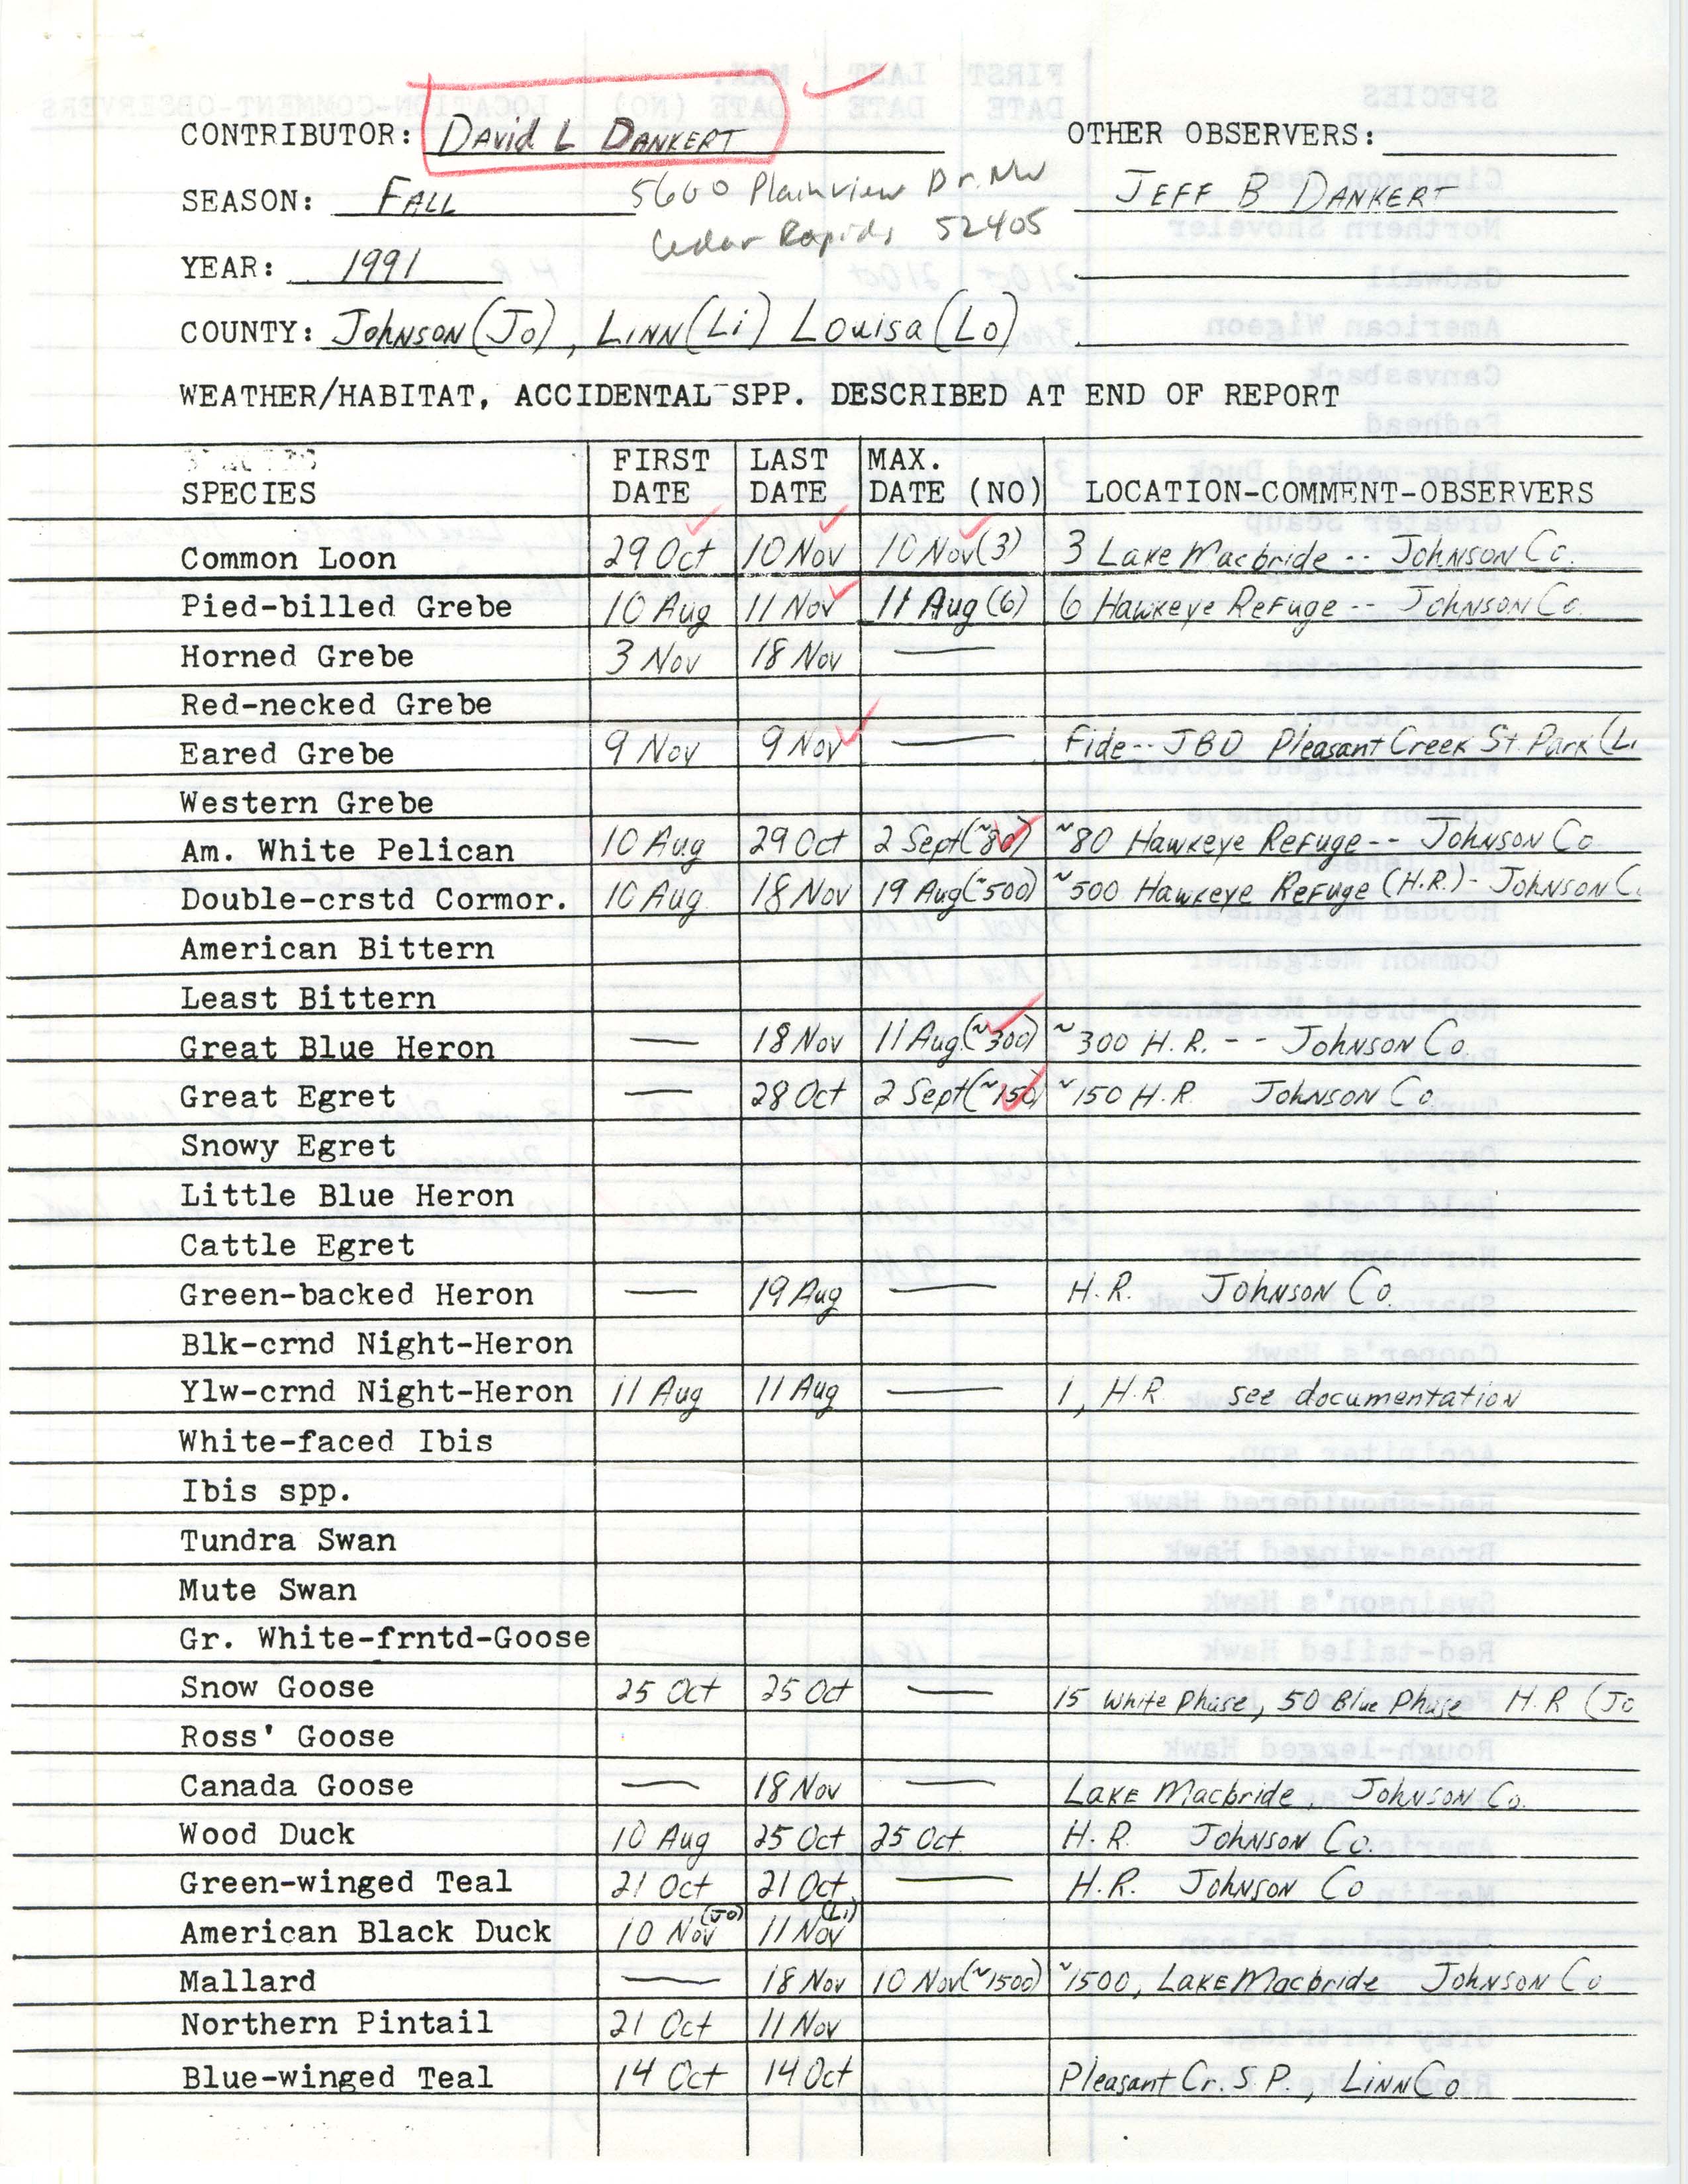 Field notes contributed by David L. Dankert, fall 1991